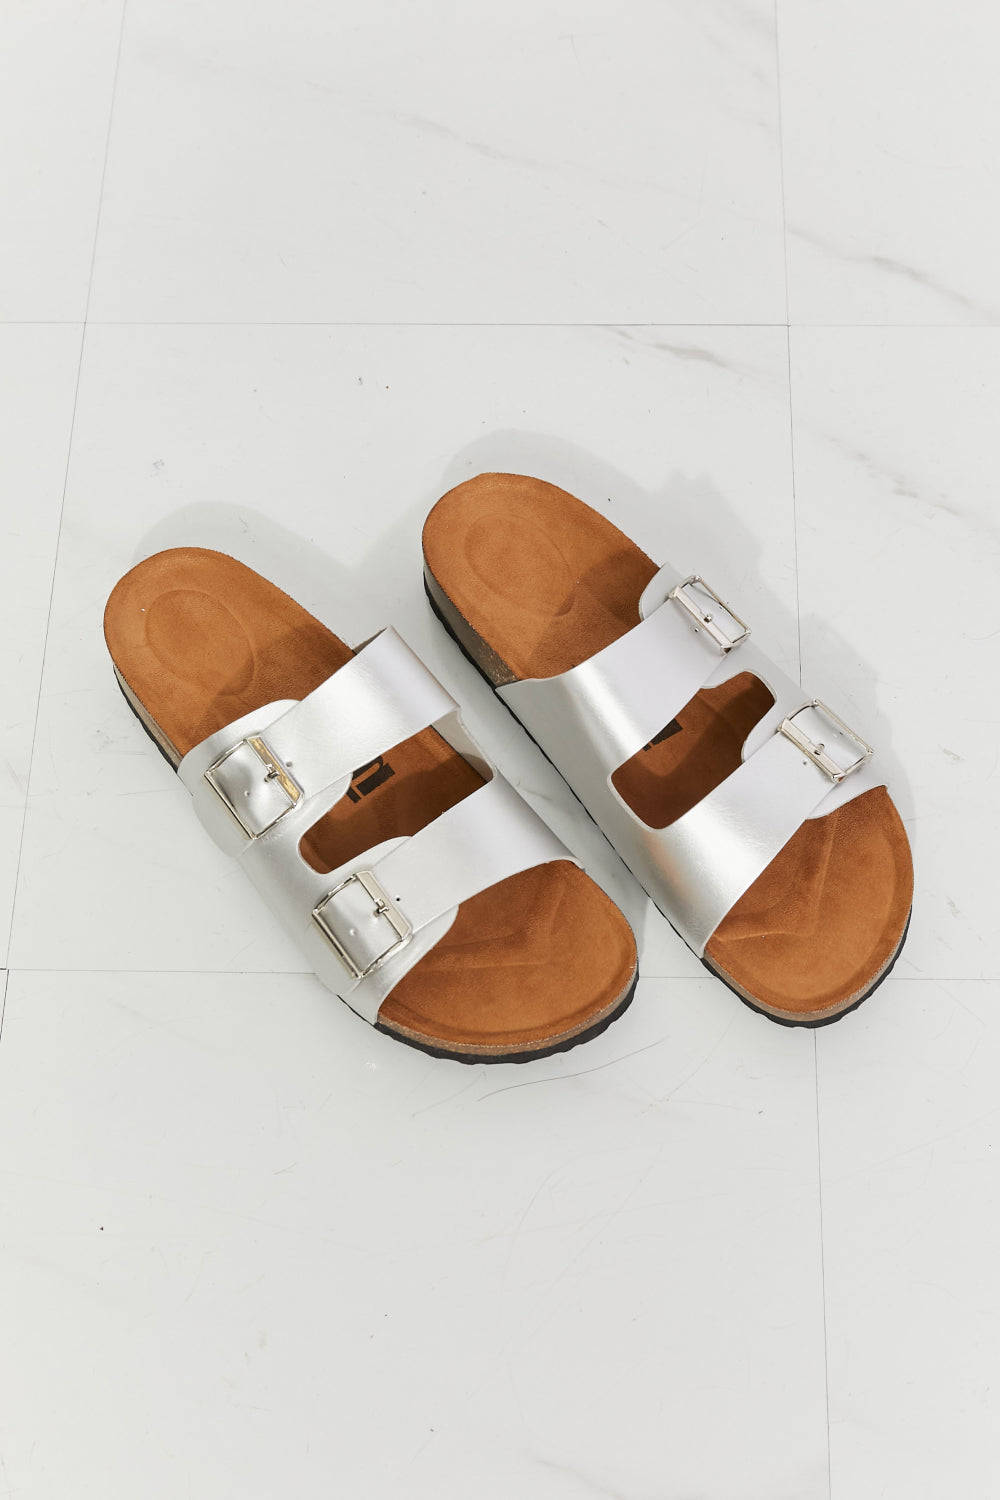 MMShoes Best Life Double-Banded Slide Sandal in Silver - Tigbul's Fashion